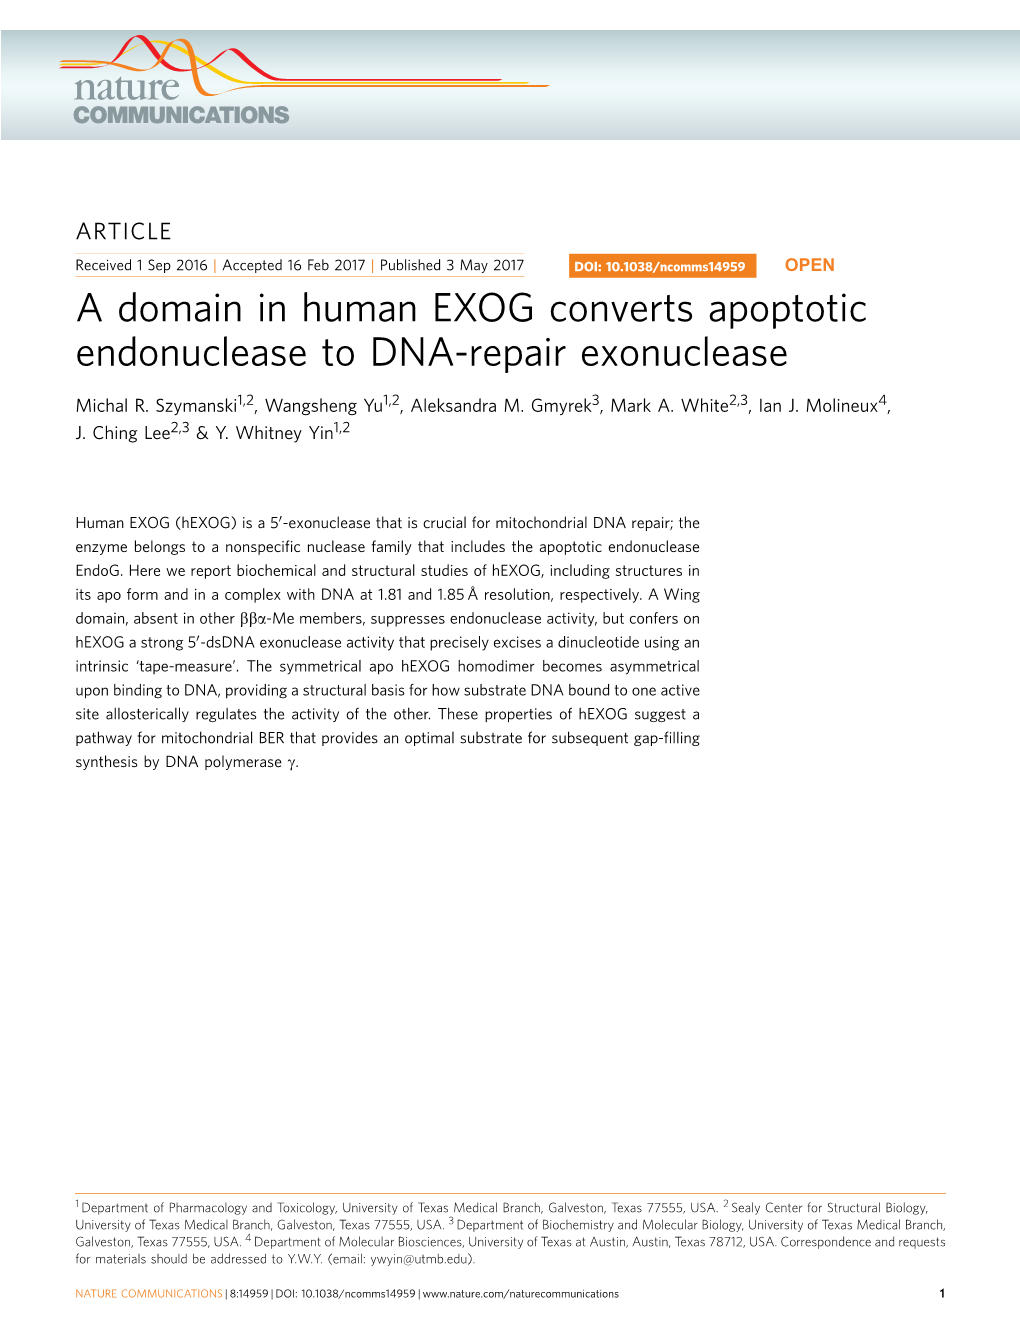 A Domain in Human EXOG Converts Apoptotic Endonuclease to DNA-Repair Exonuclease